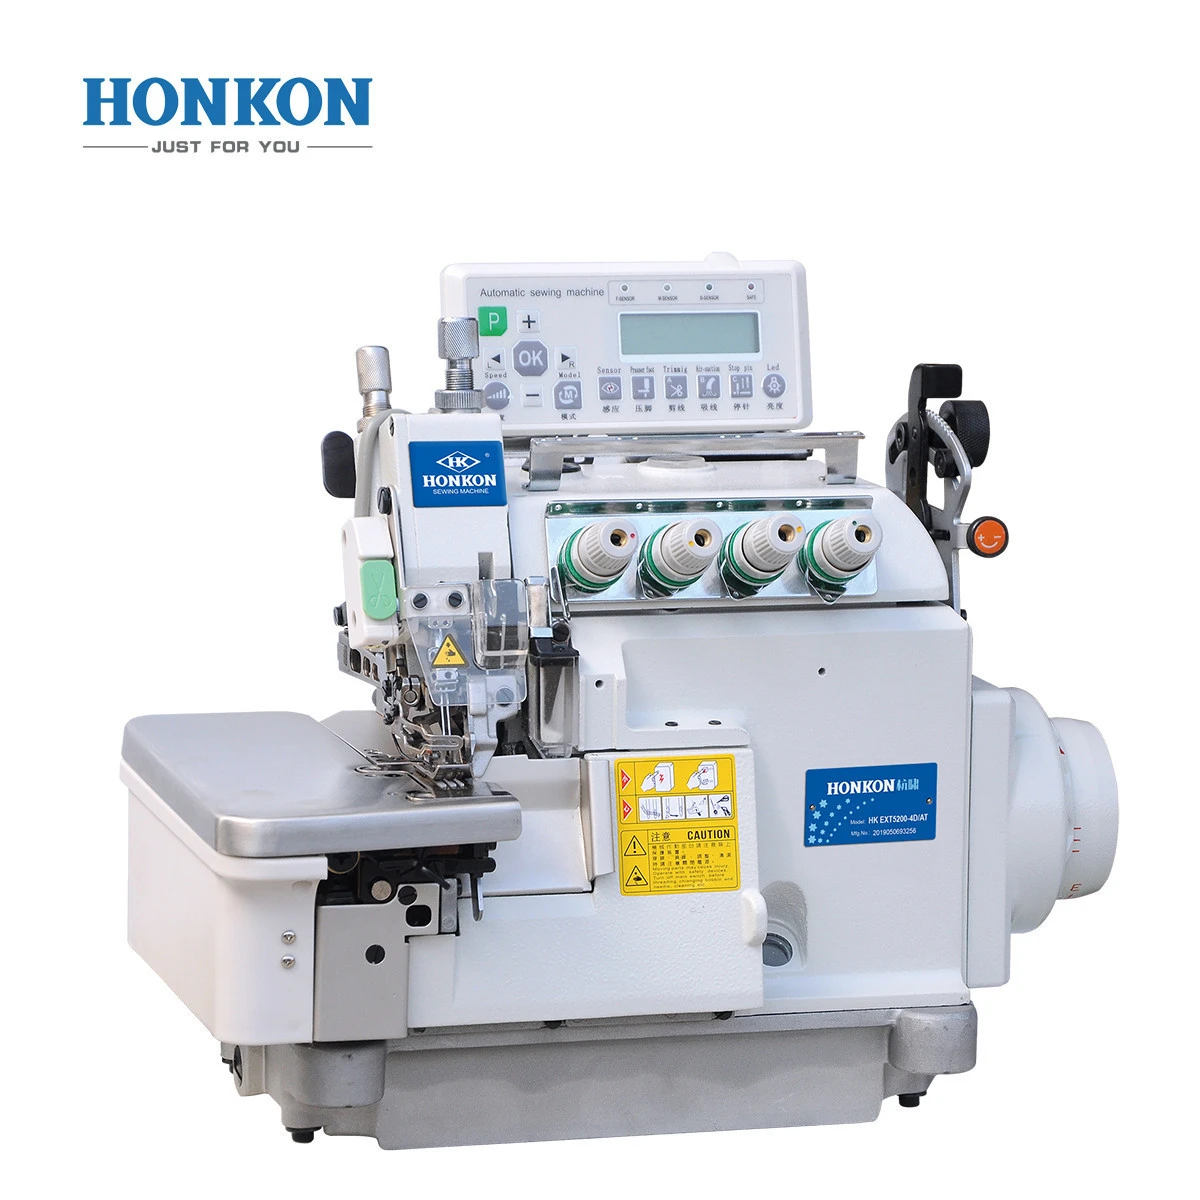 Mixed feeding HK-EXT5200-4D Direct drive high speed overlock sewing machine Industrial